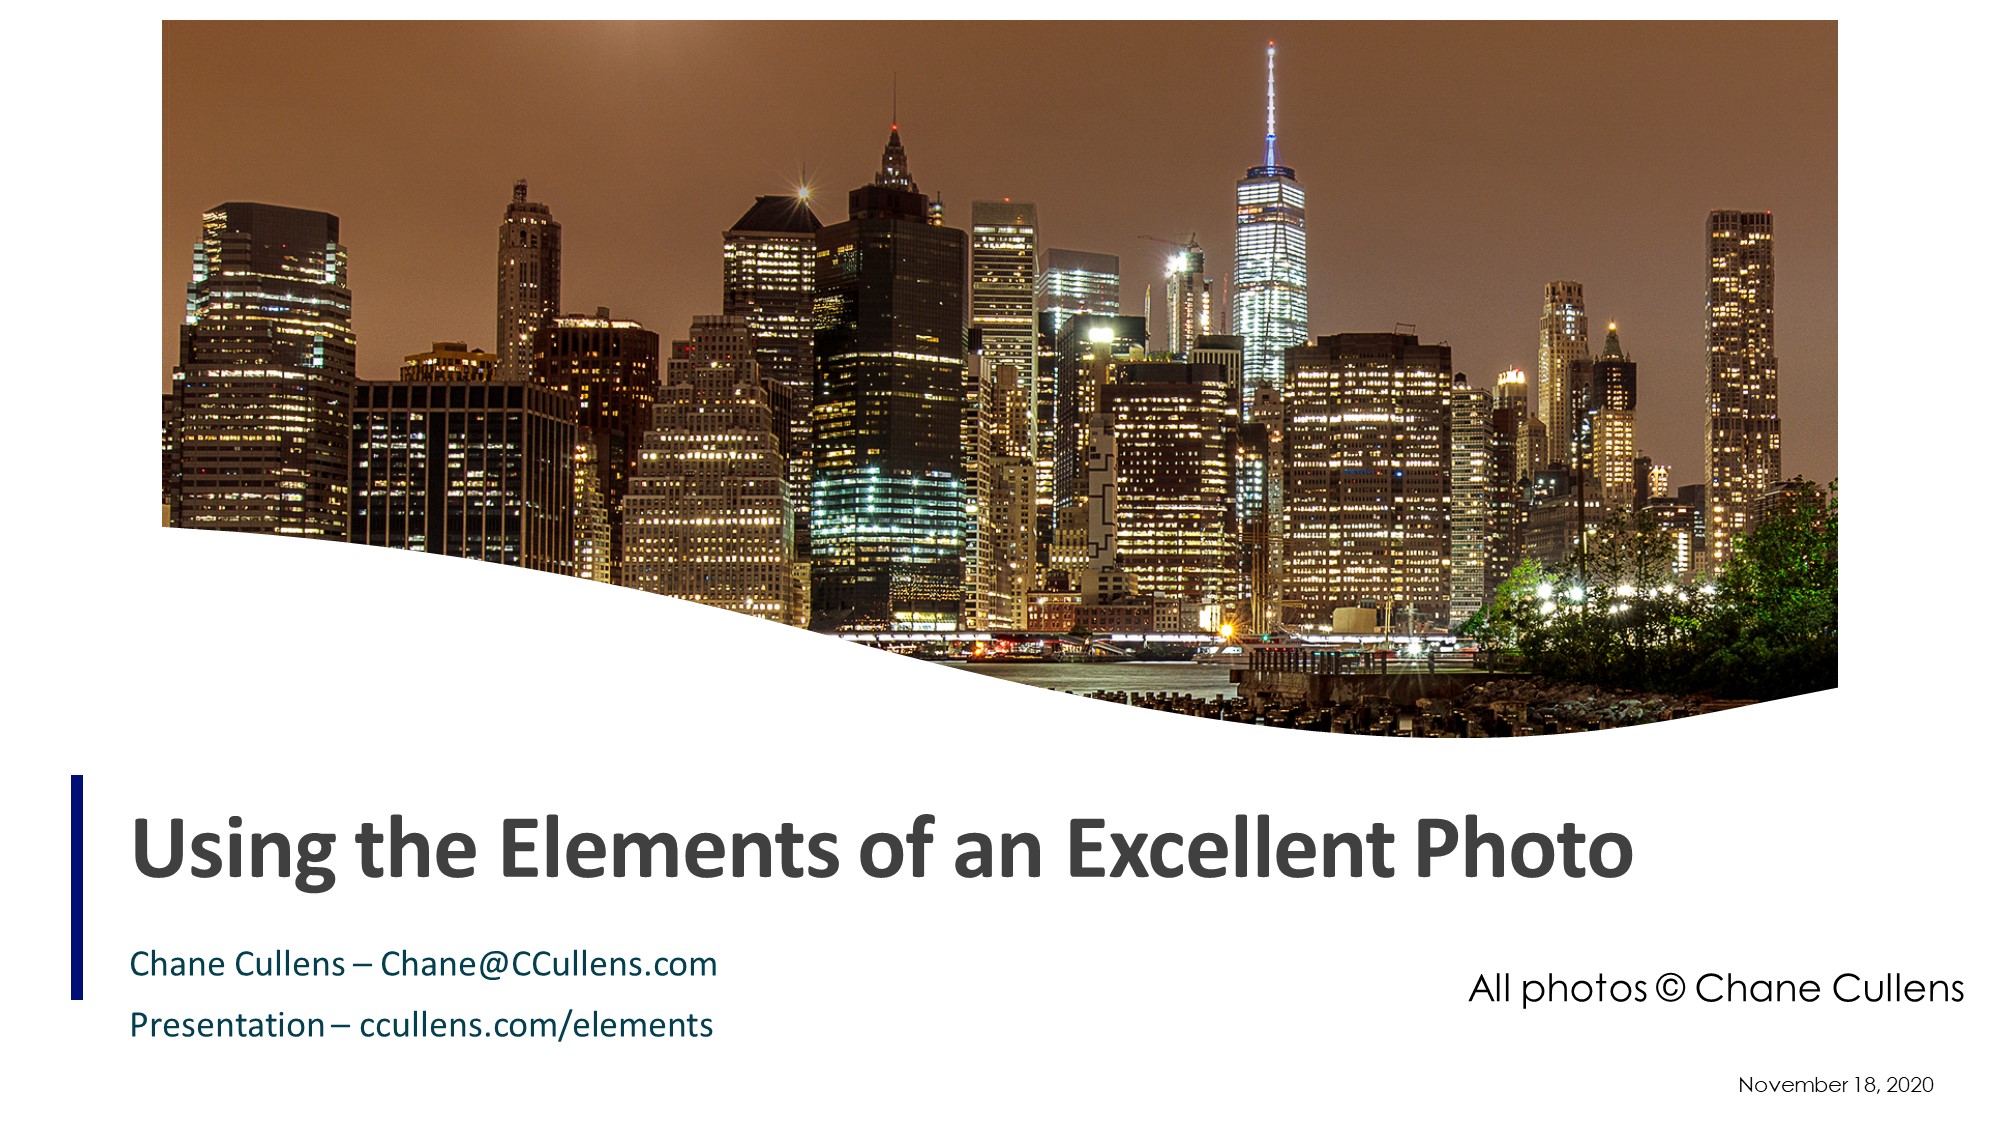 Video of Using the Elements of an Excellent Photo by Chane Cullens